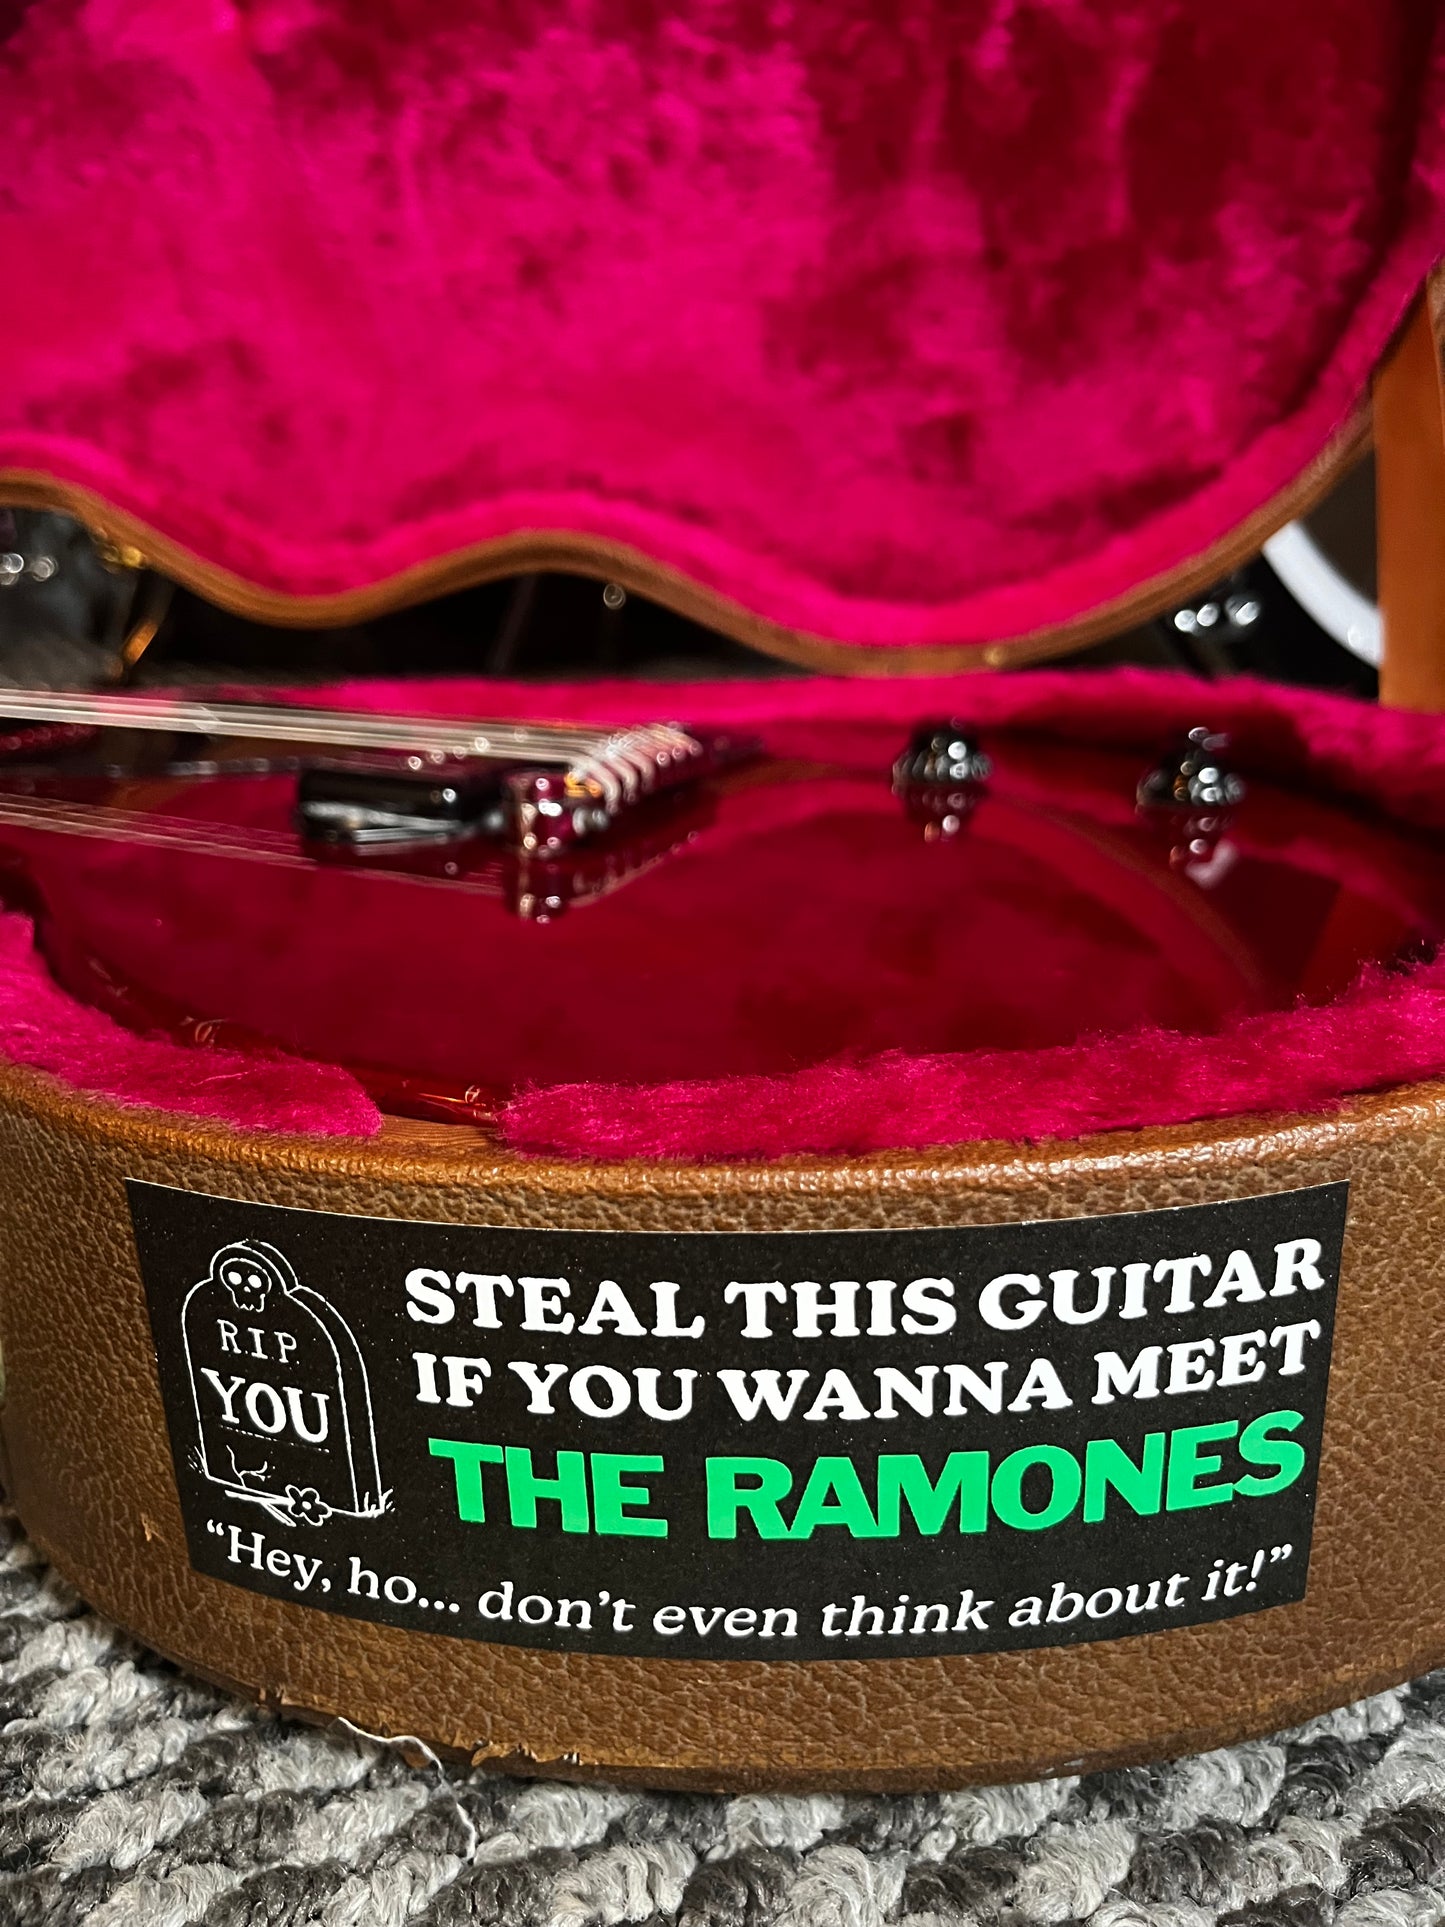 Steal This Guitar If You Want to Meet the Ramones Sticker